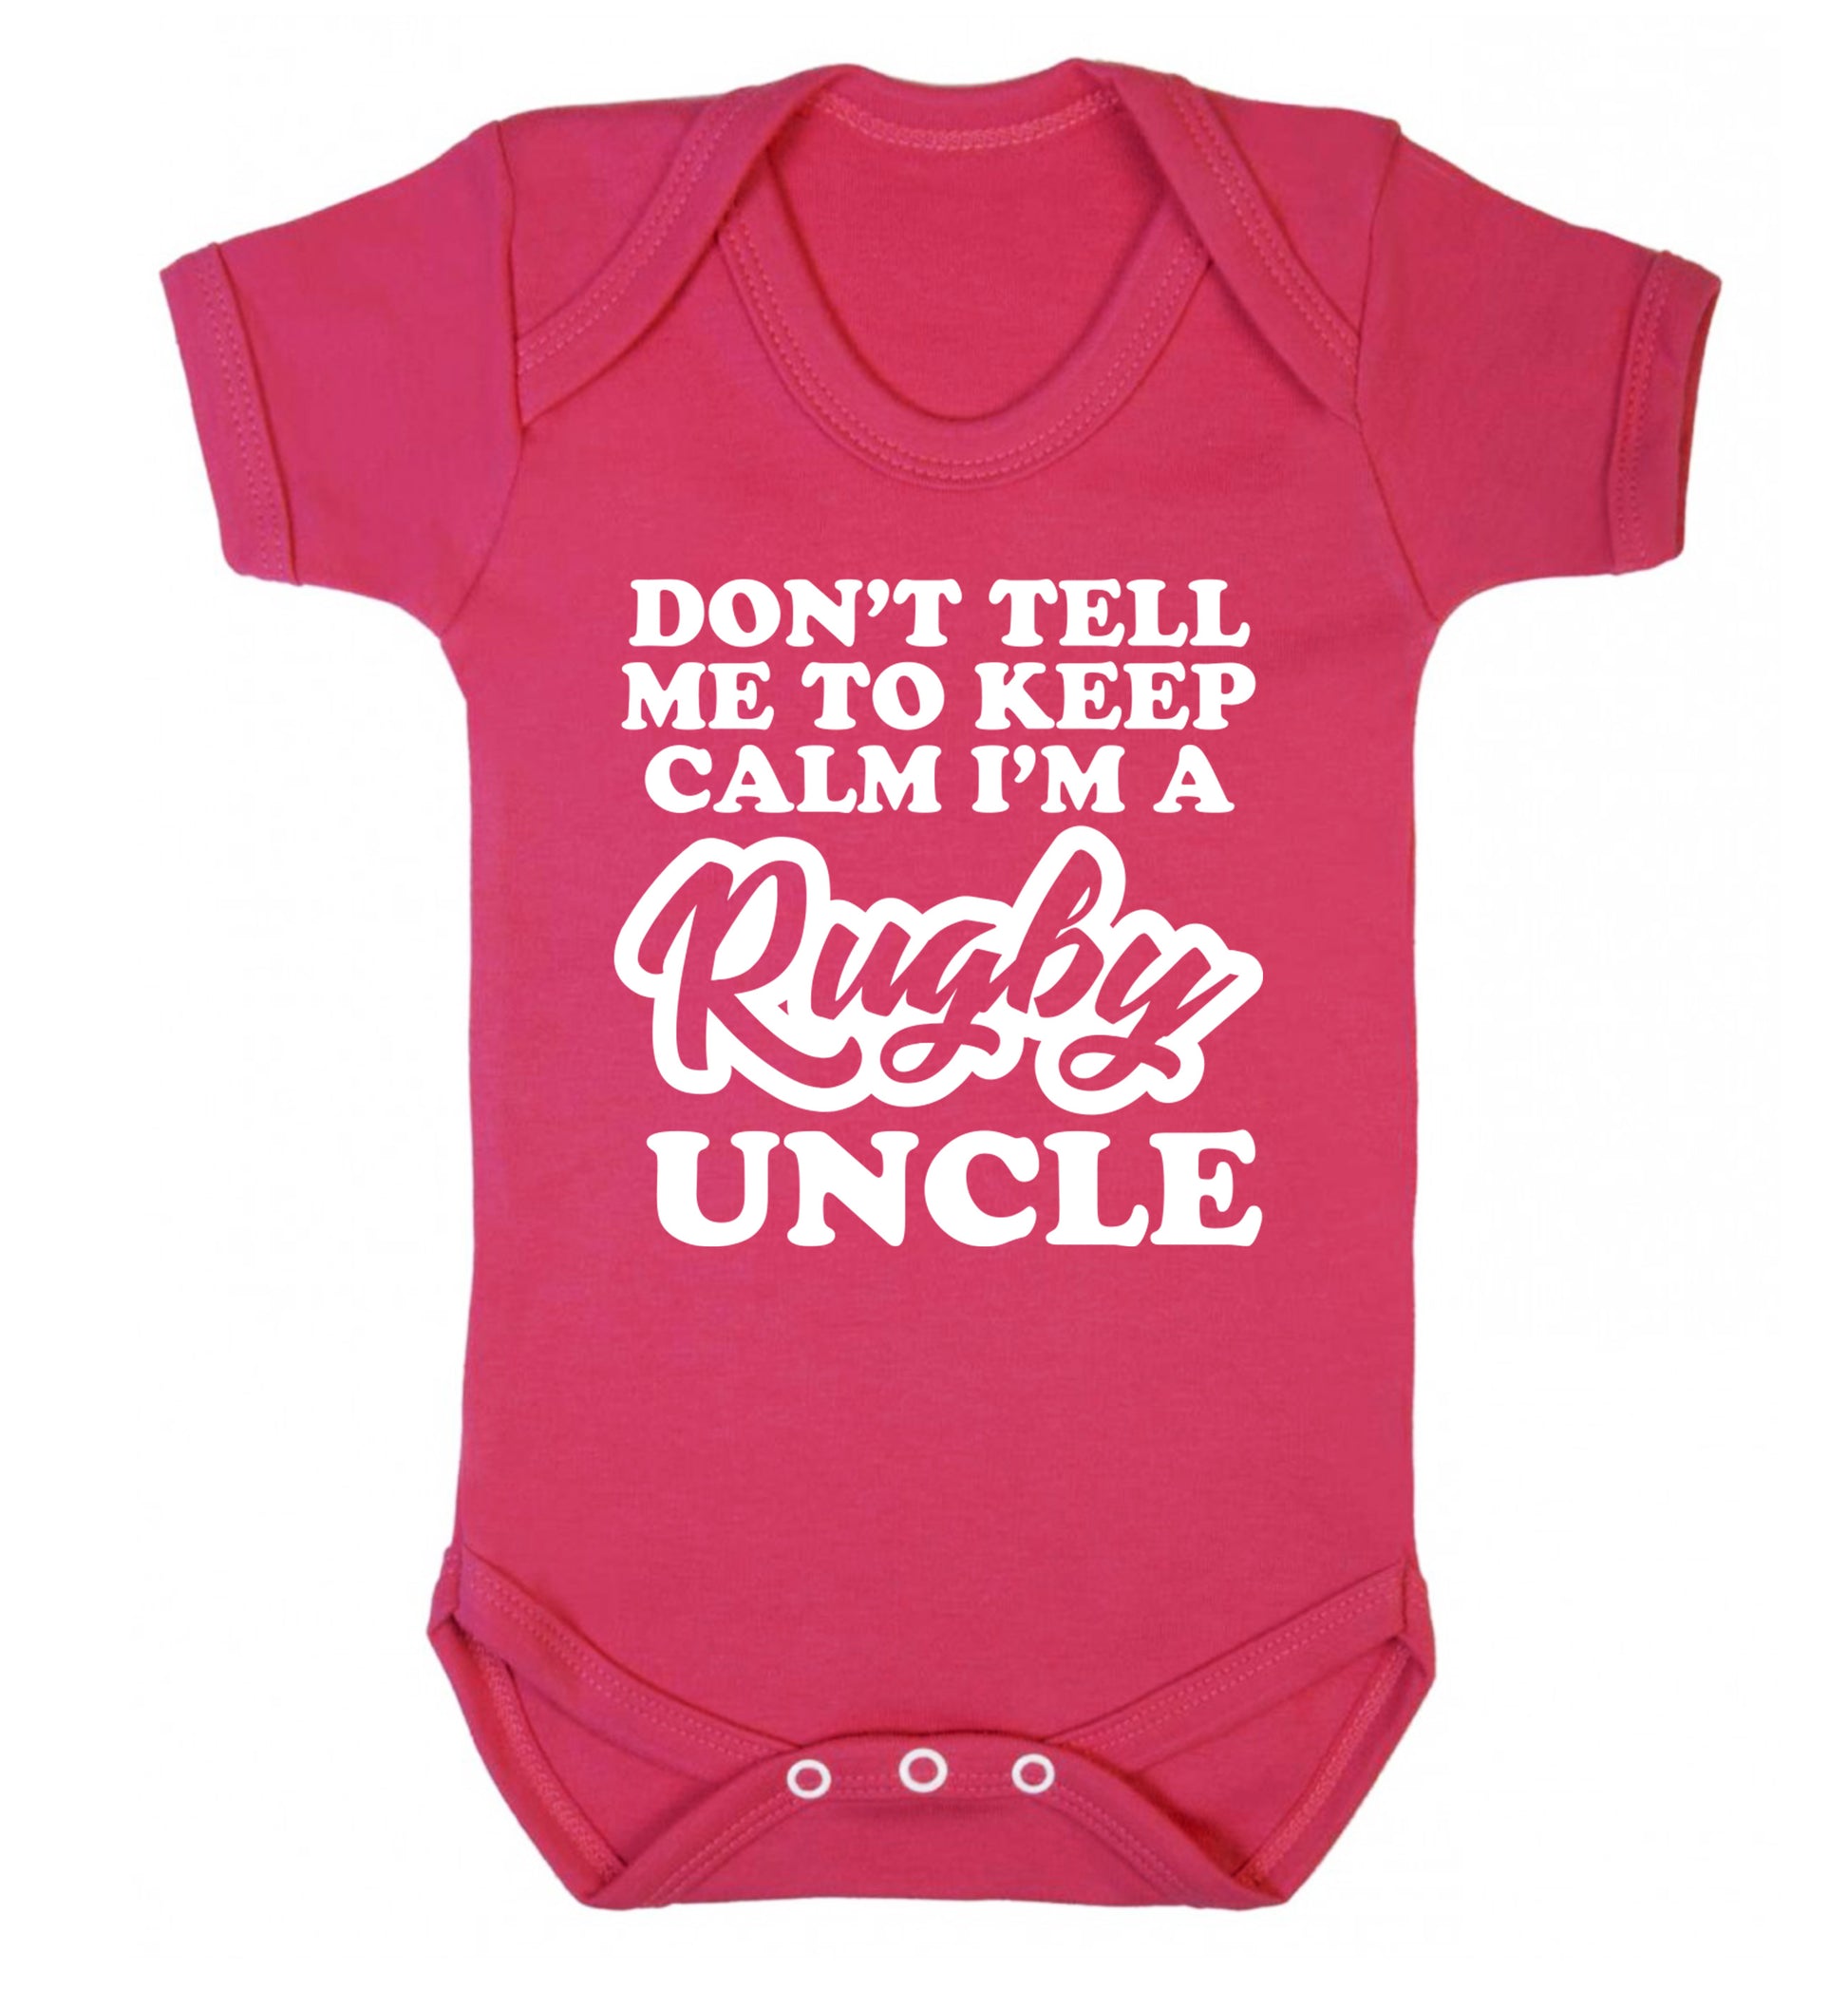 Don't tell me to keep calm I'm a rugby uncle Baby Vest dark pink 18-24 months